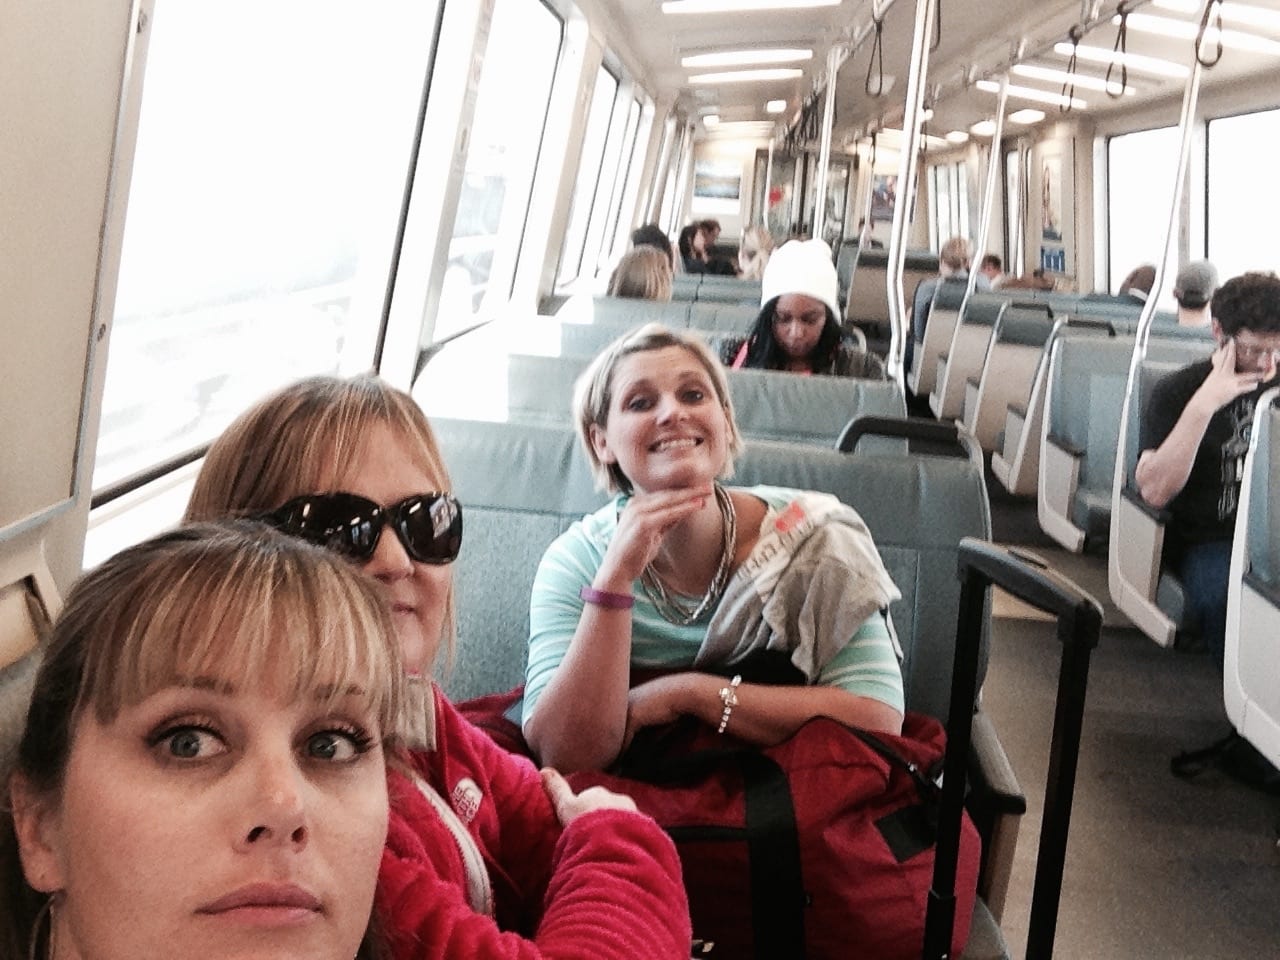 Riding the Bart in San Francisco